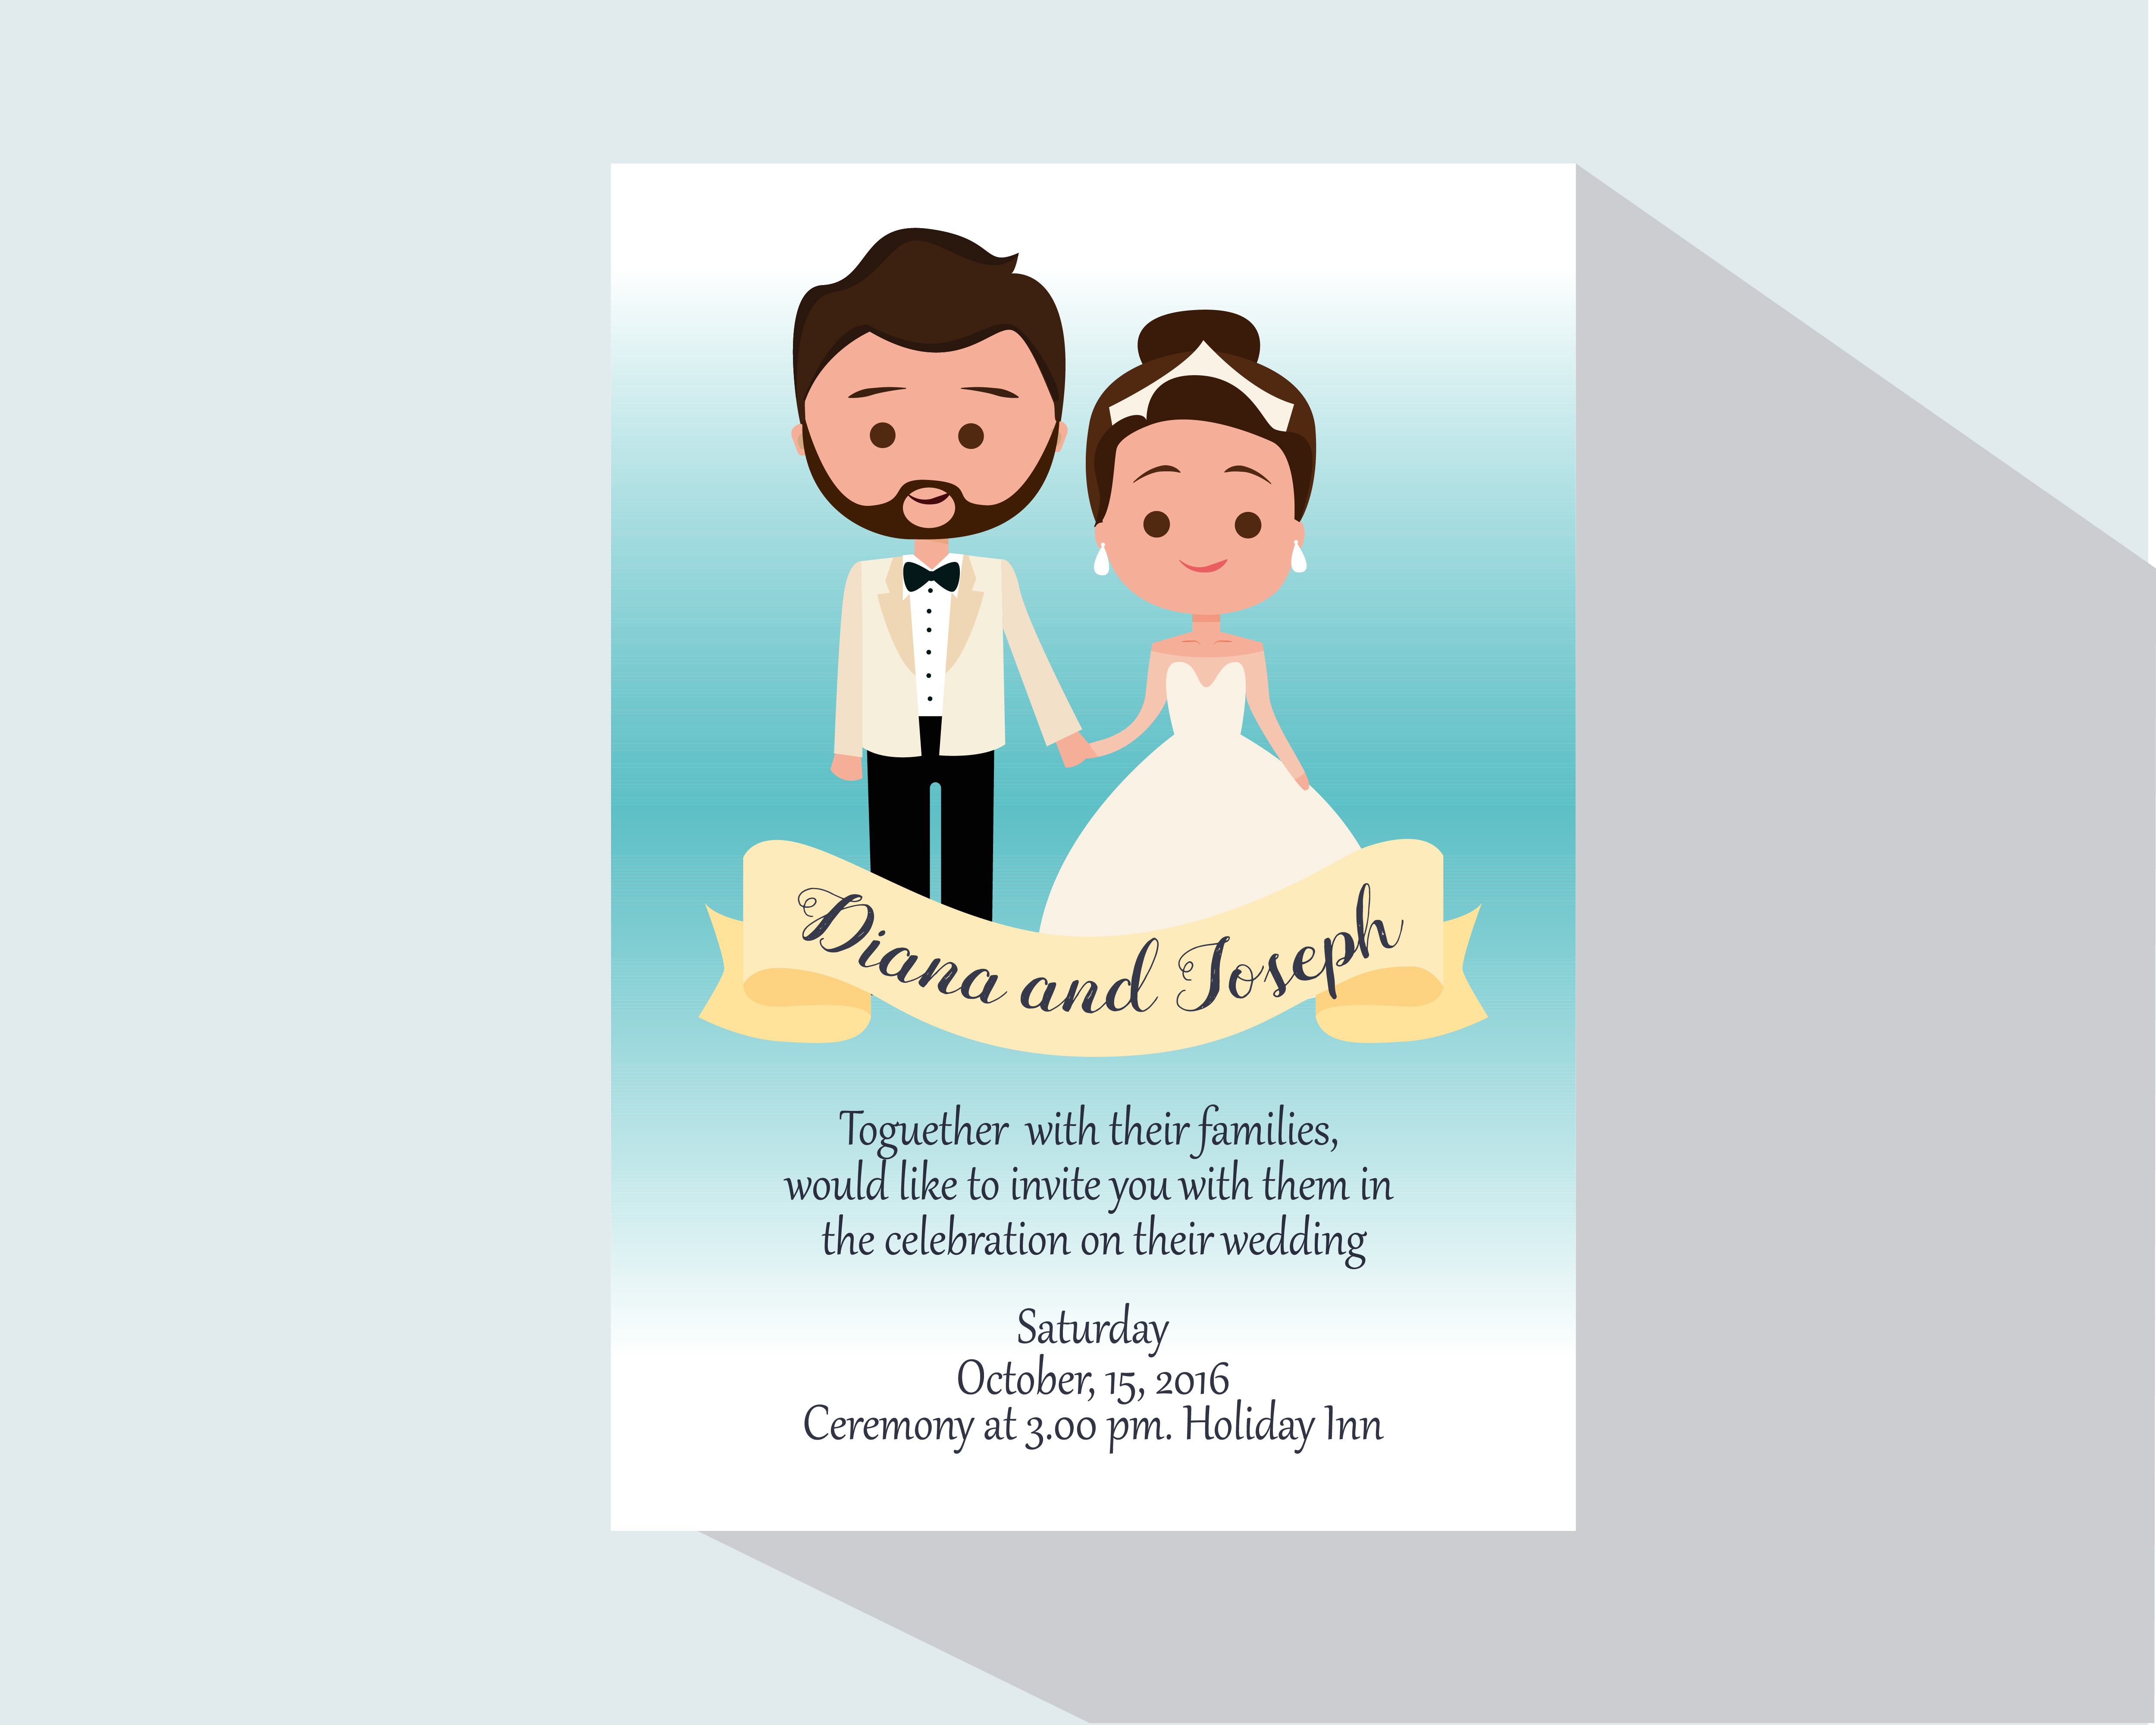 Couple of Bride and Groom Avatar Design Stock Vector  Illustration of  suit event 165162911